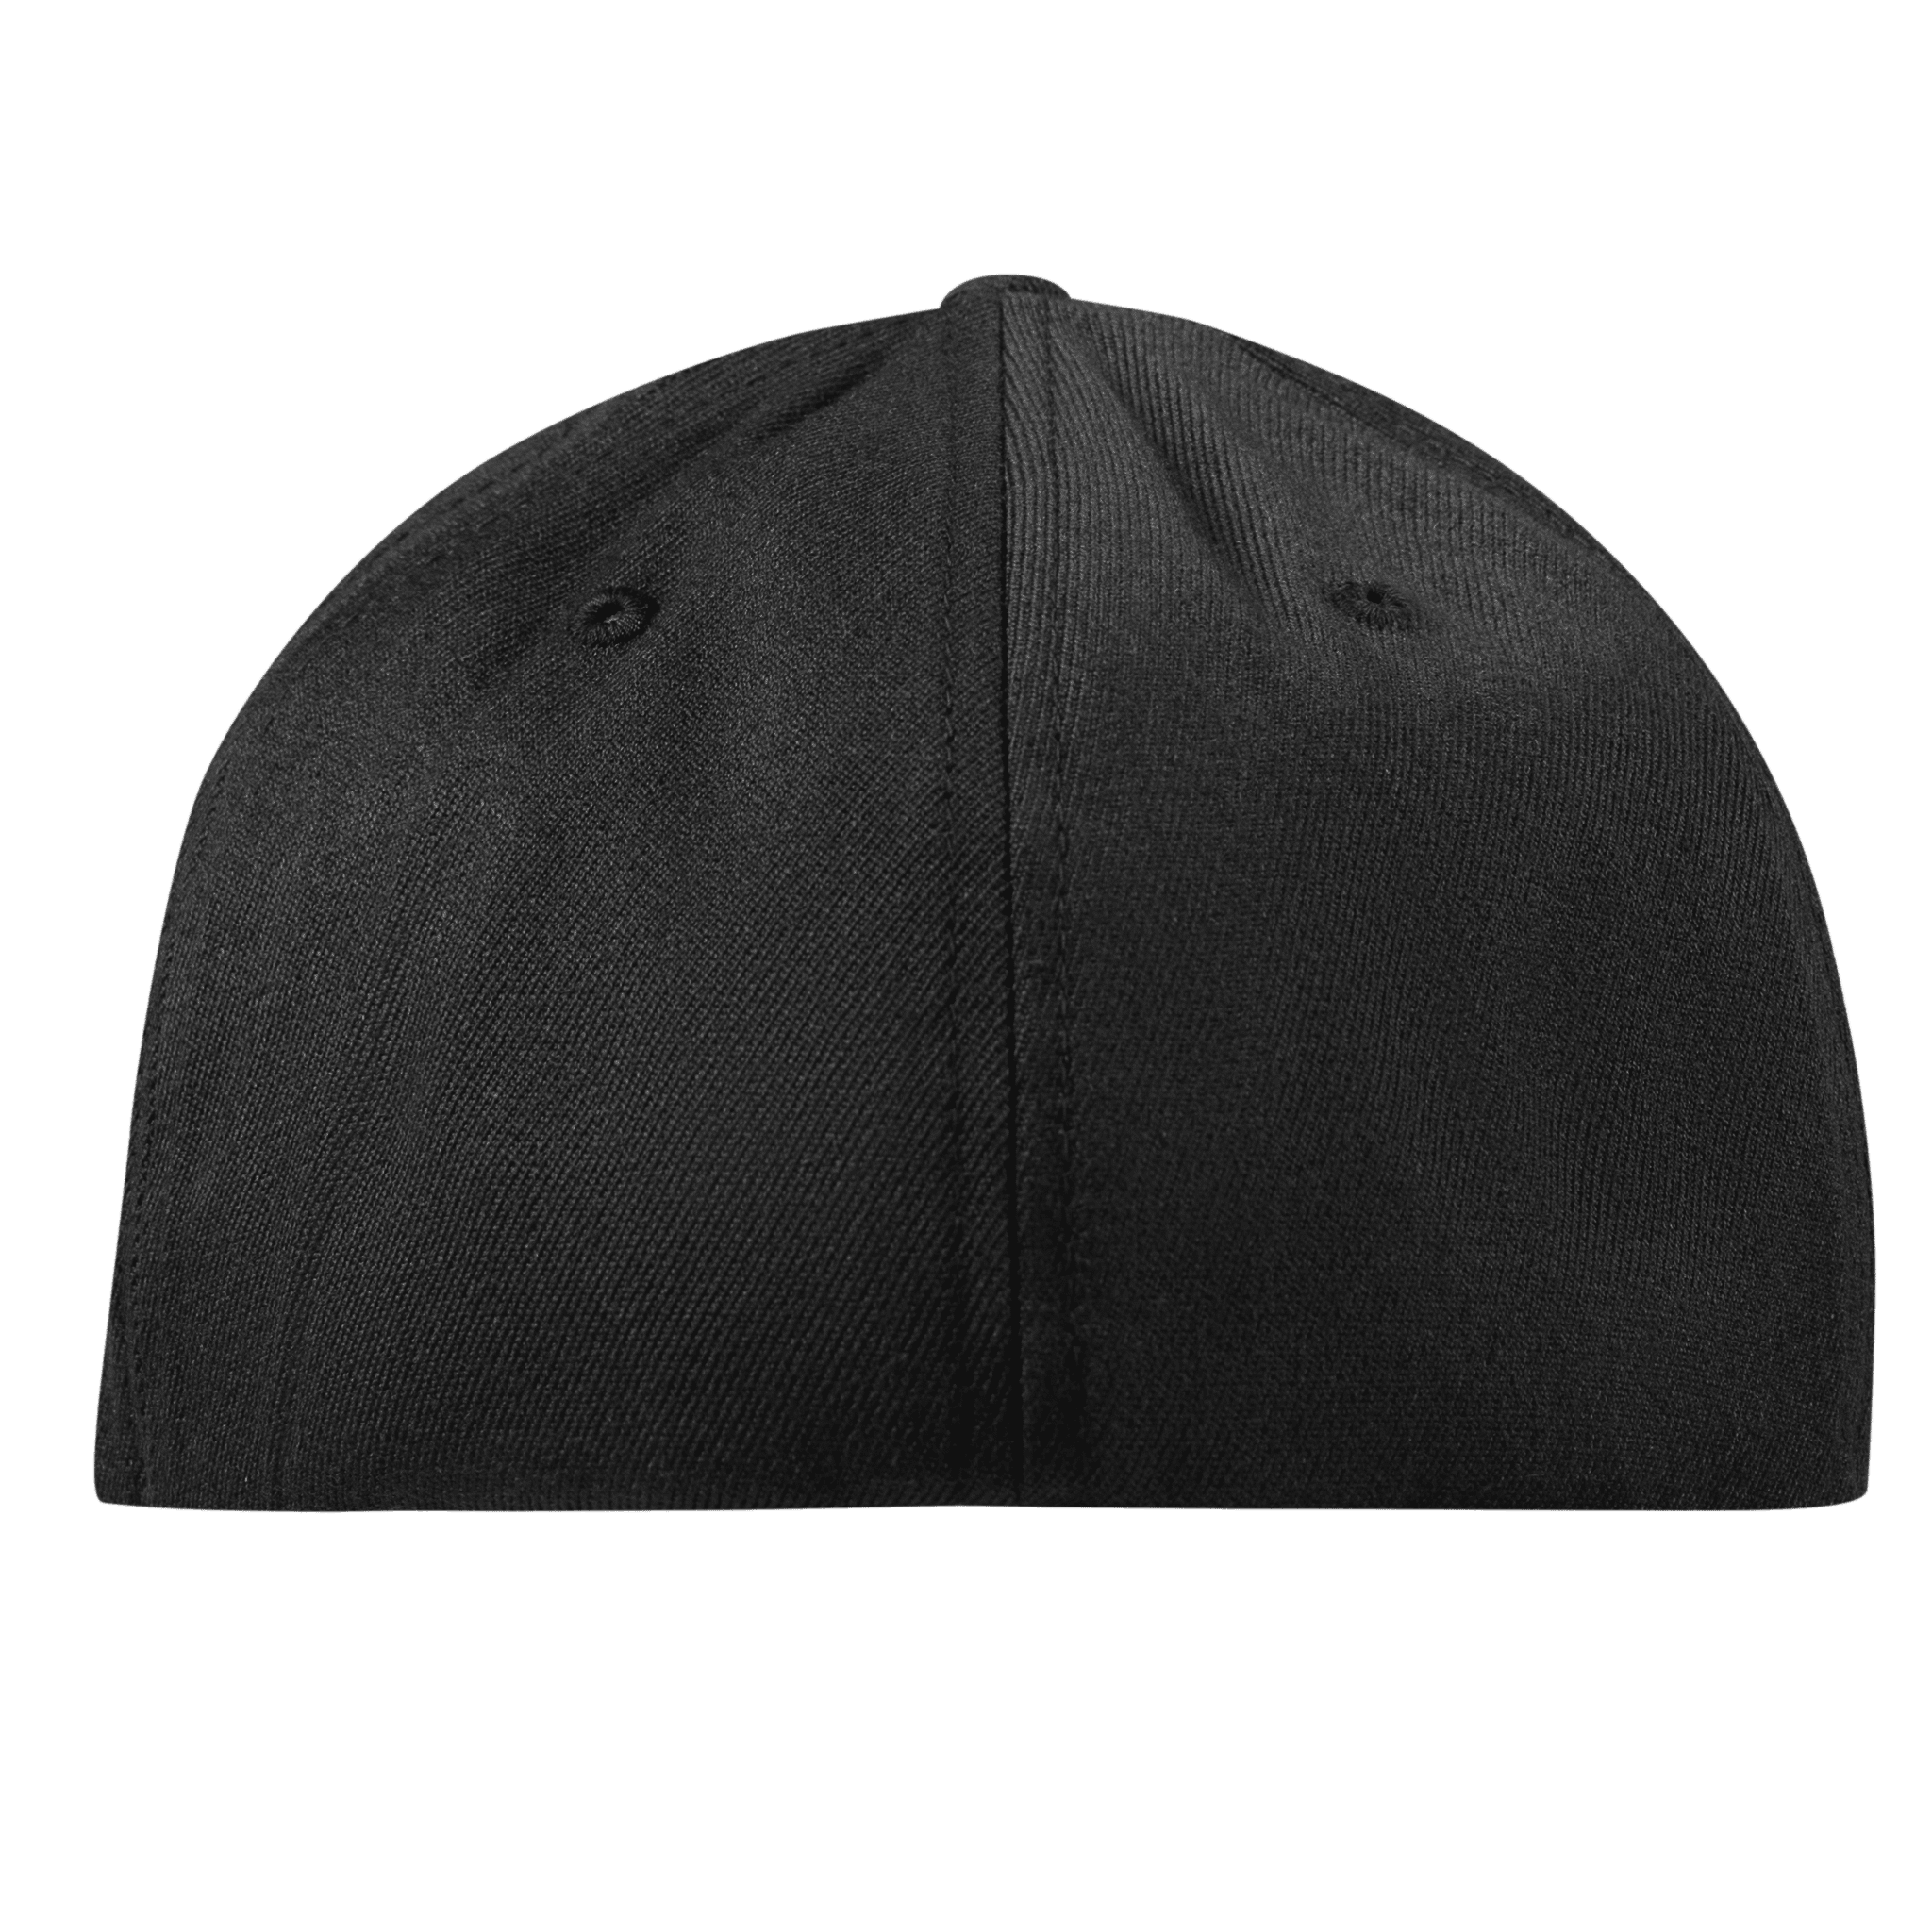 Ohio 17 Midnight Flexfit Fitted Back Black